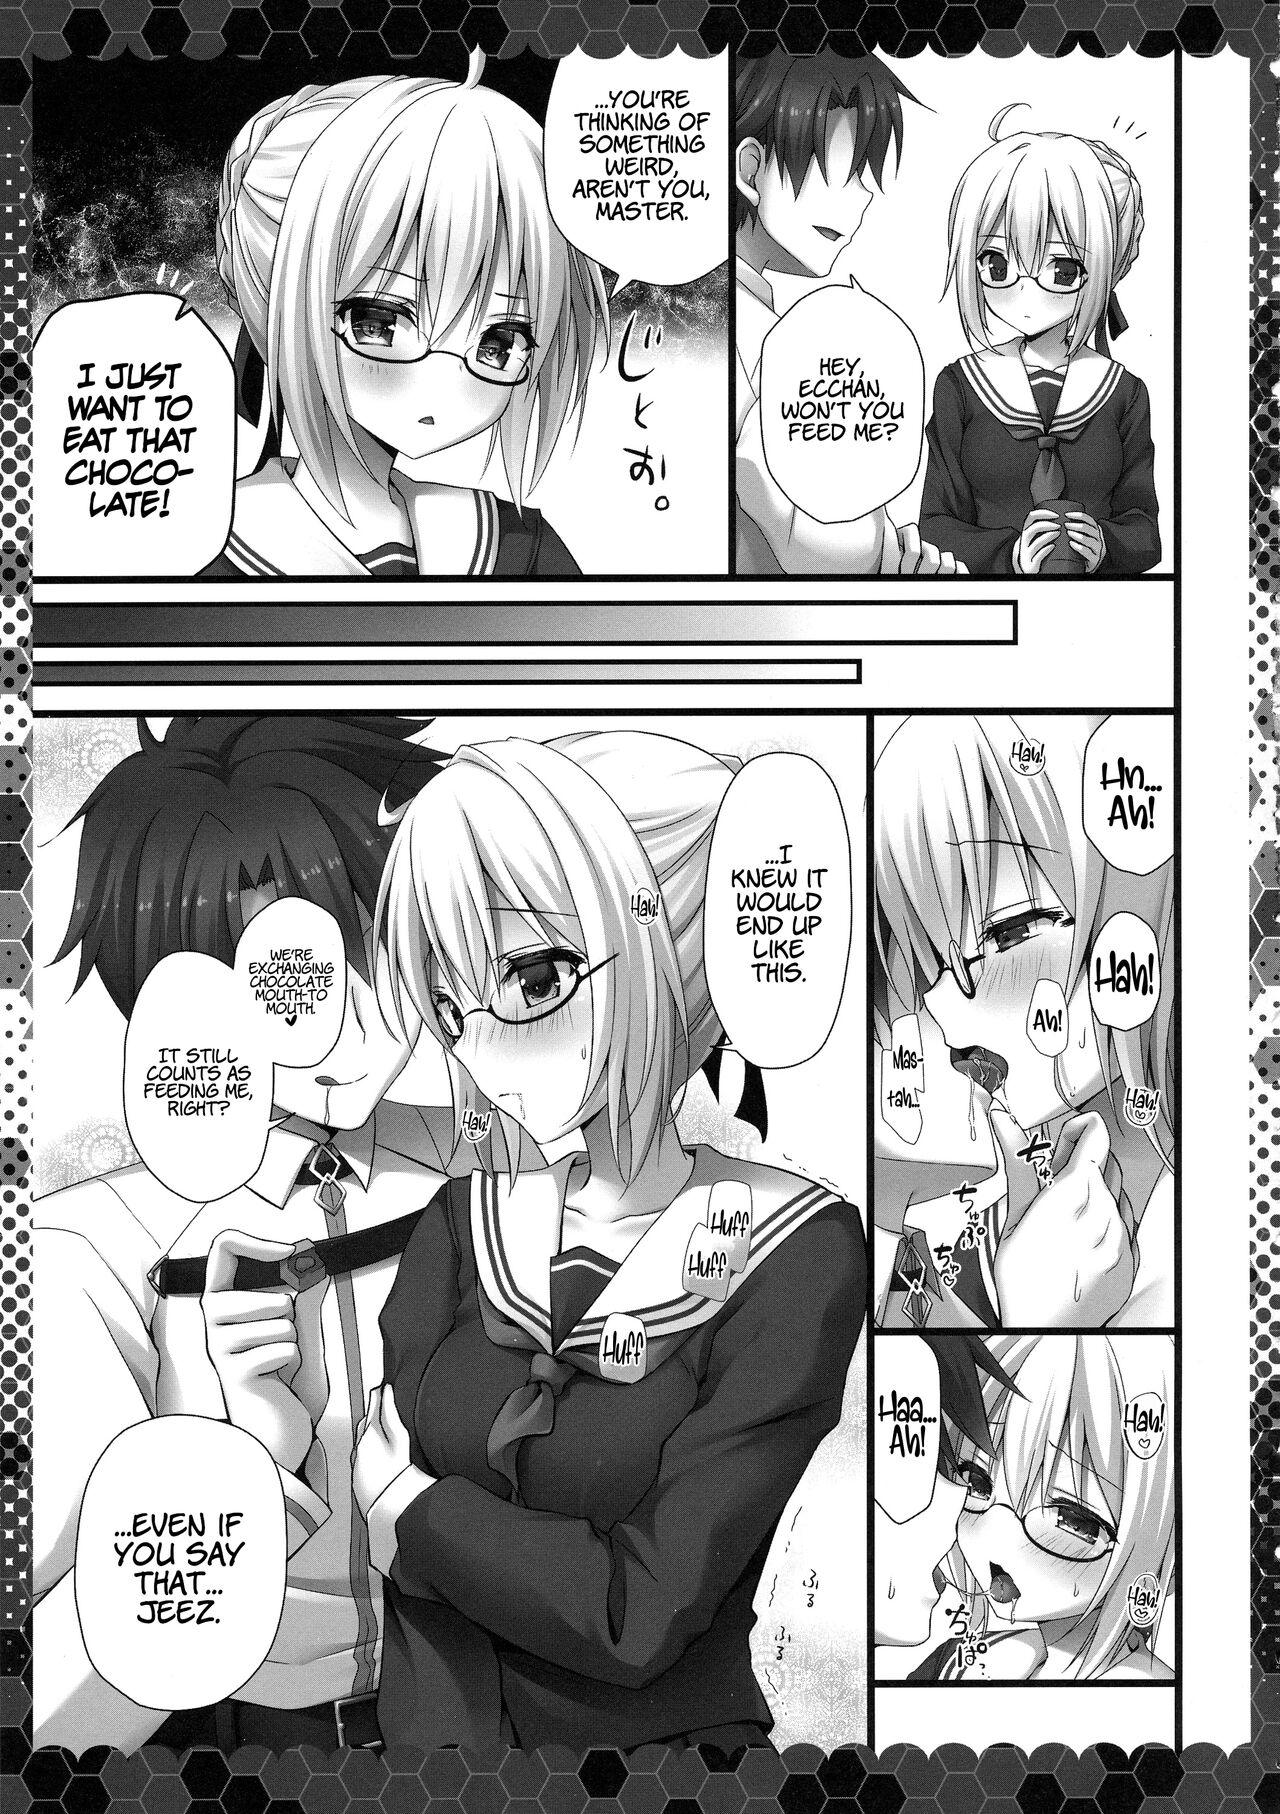 Eat up! Heroine X Alter-chan 5